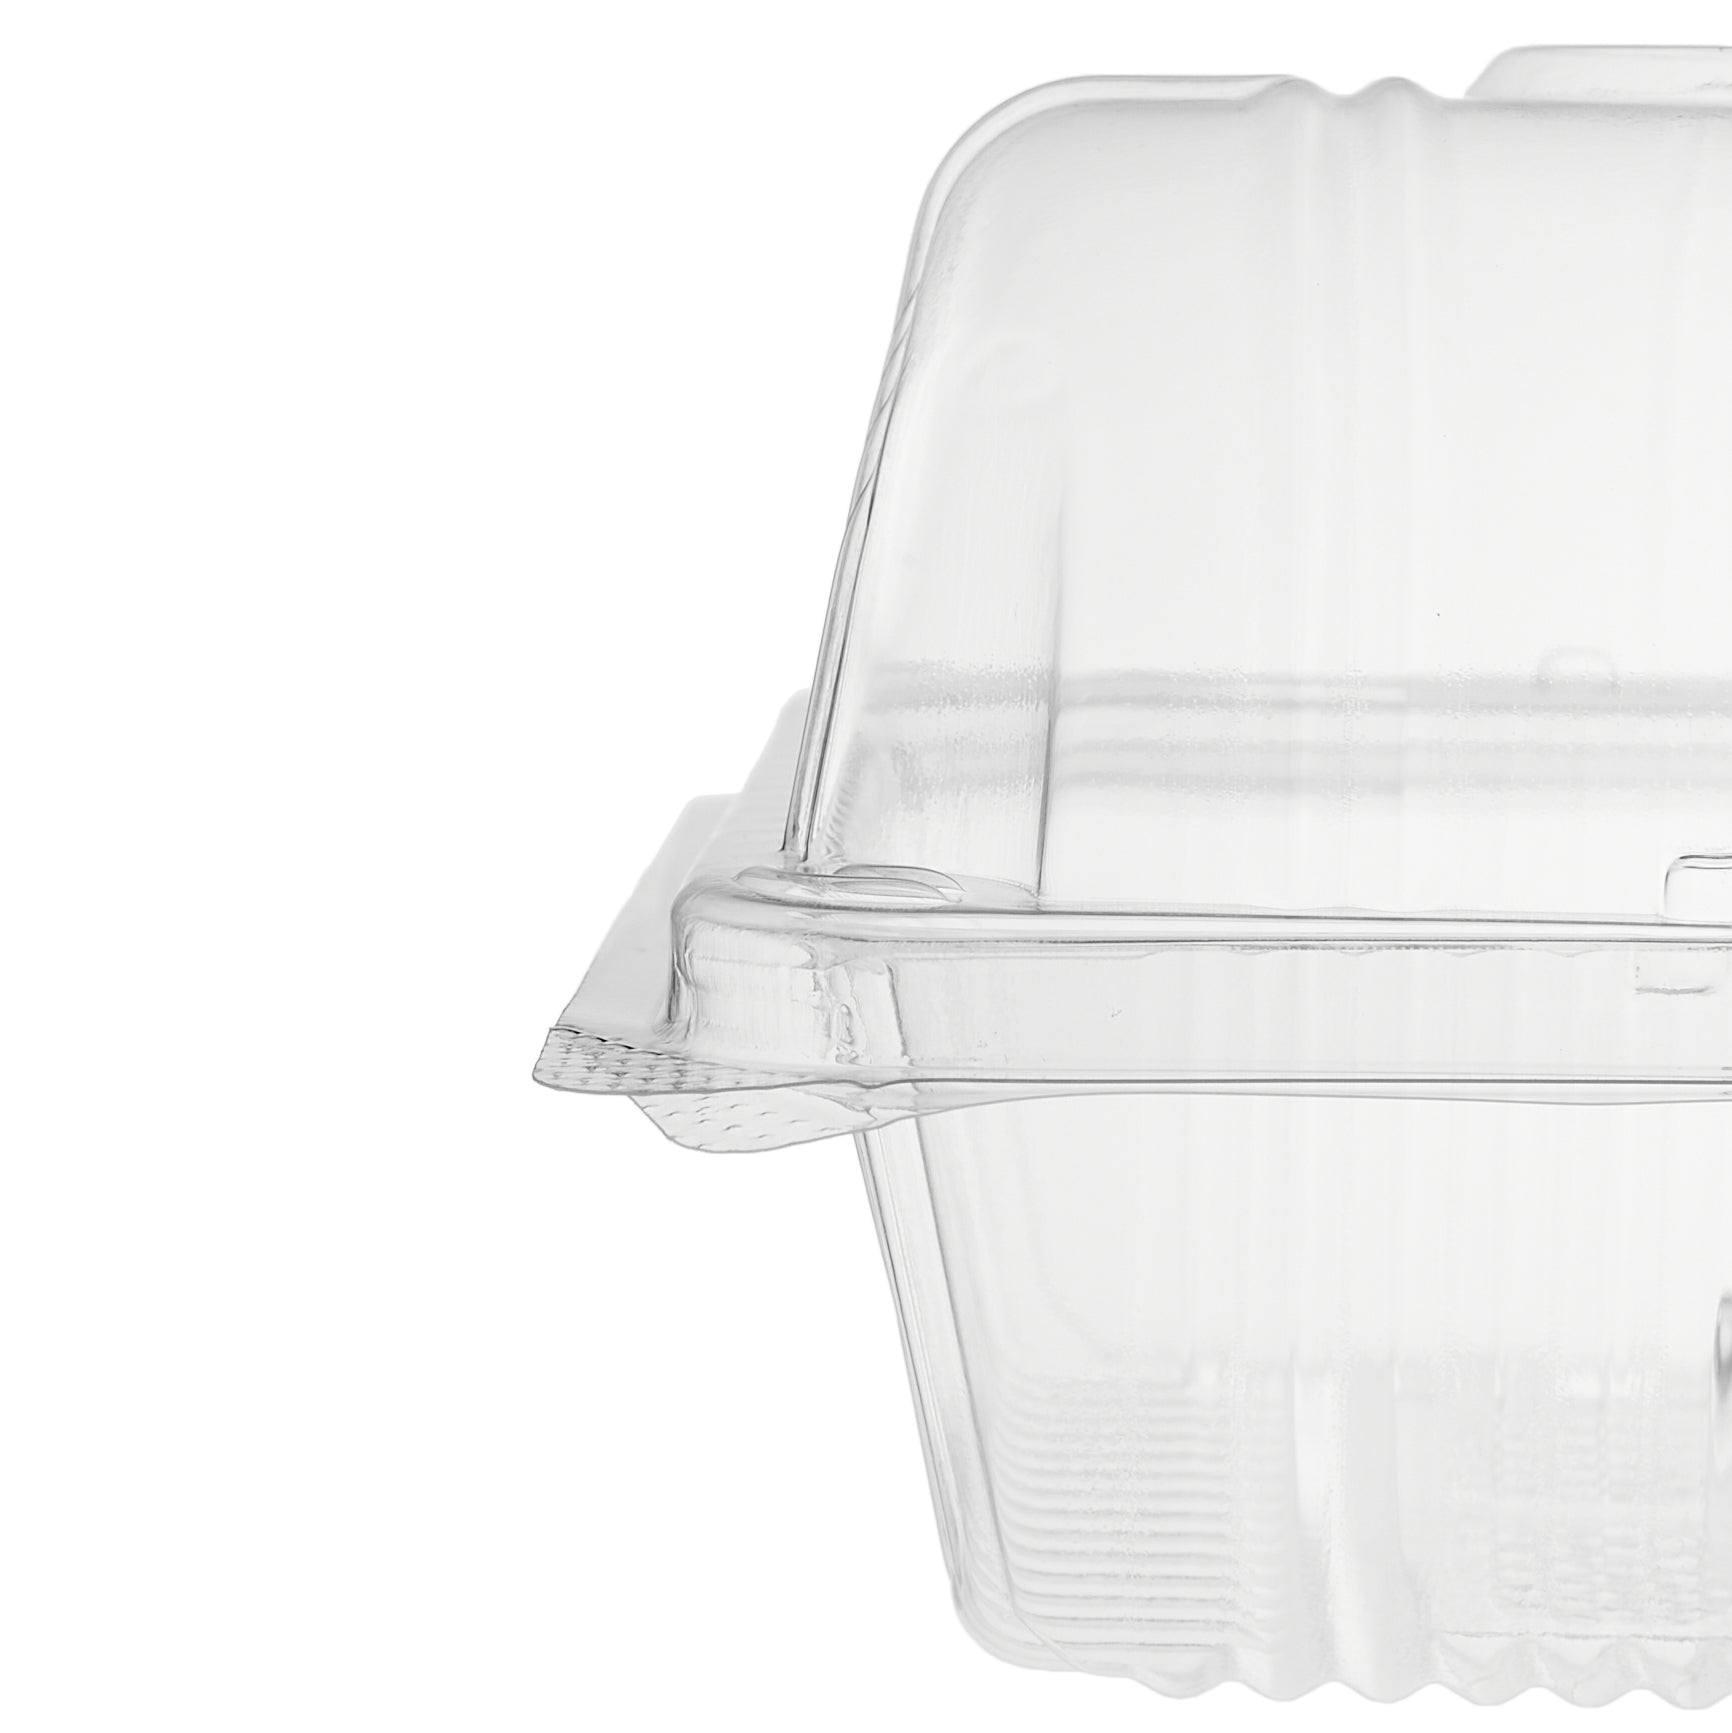 Hotpack | Rectangle Plastic Container | 500 Pieces - Hotpack Bahrain